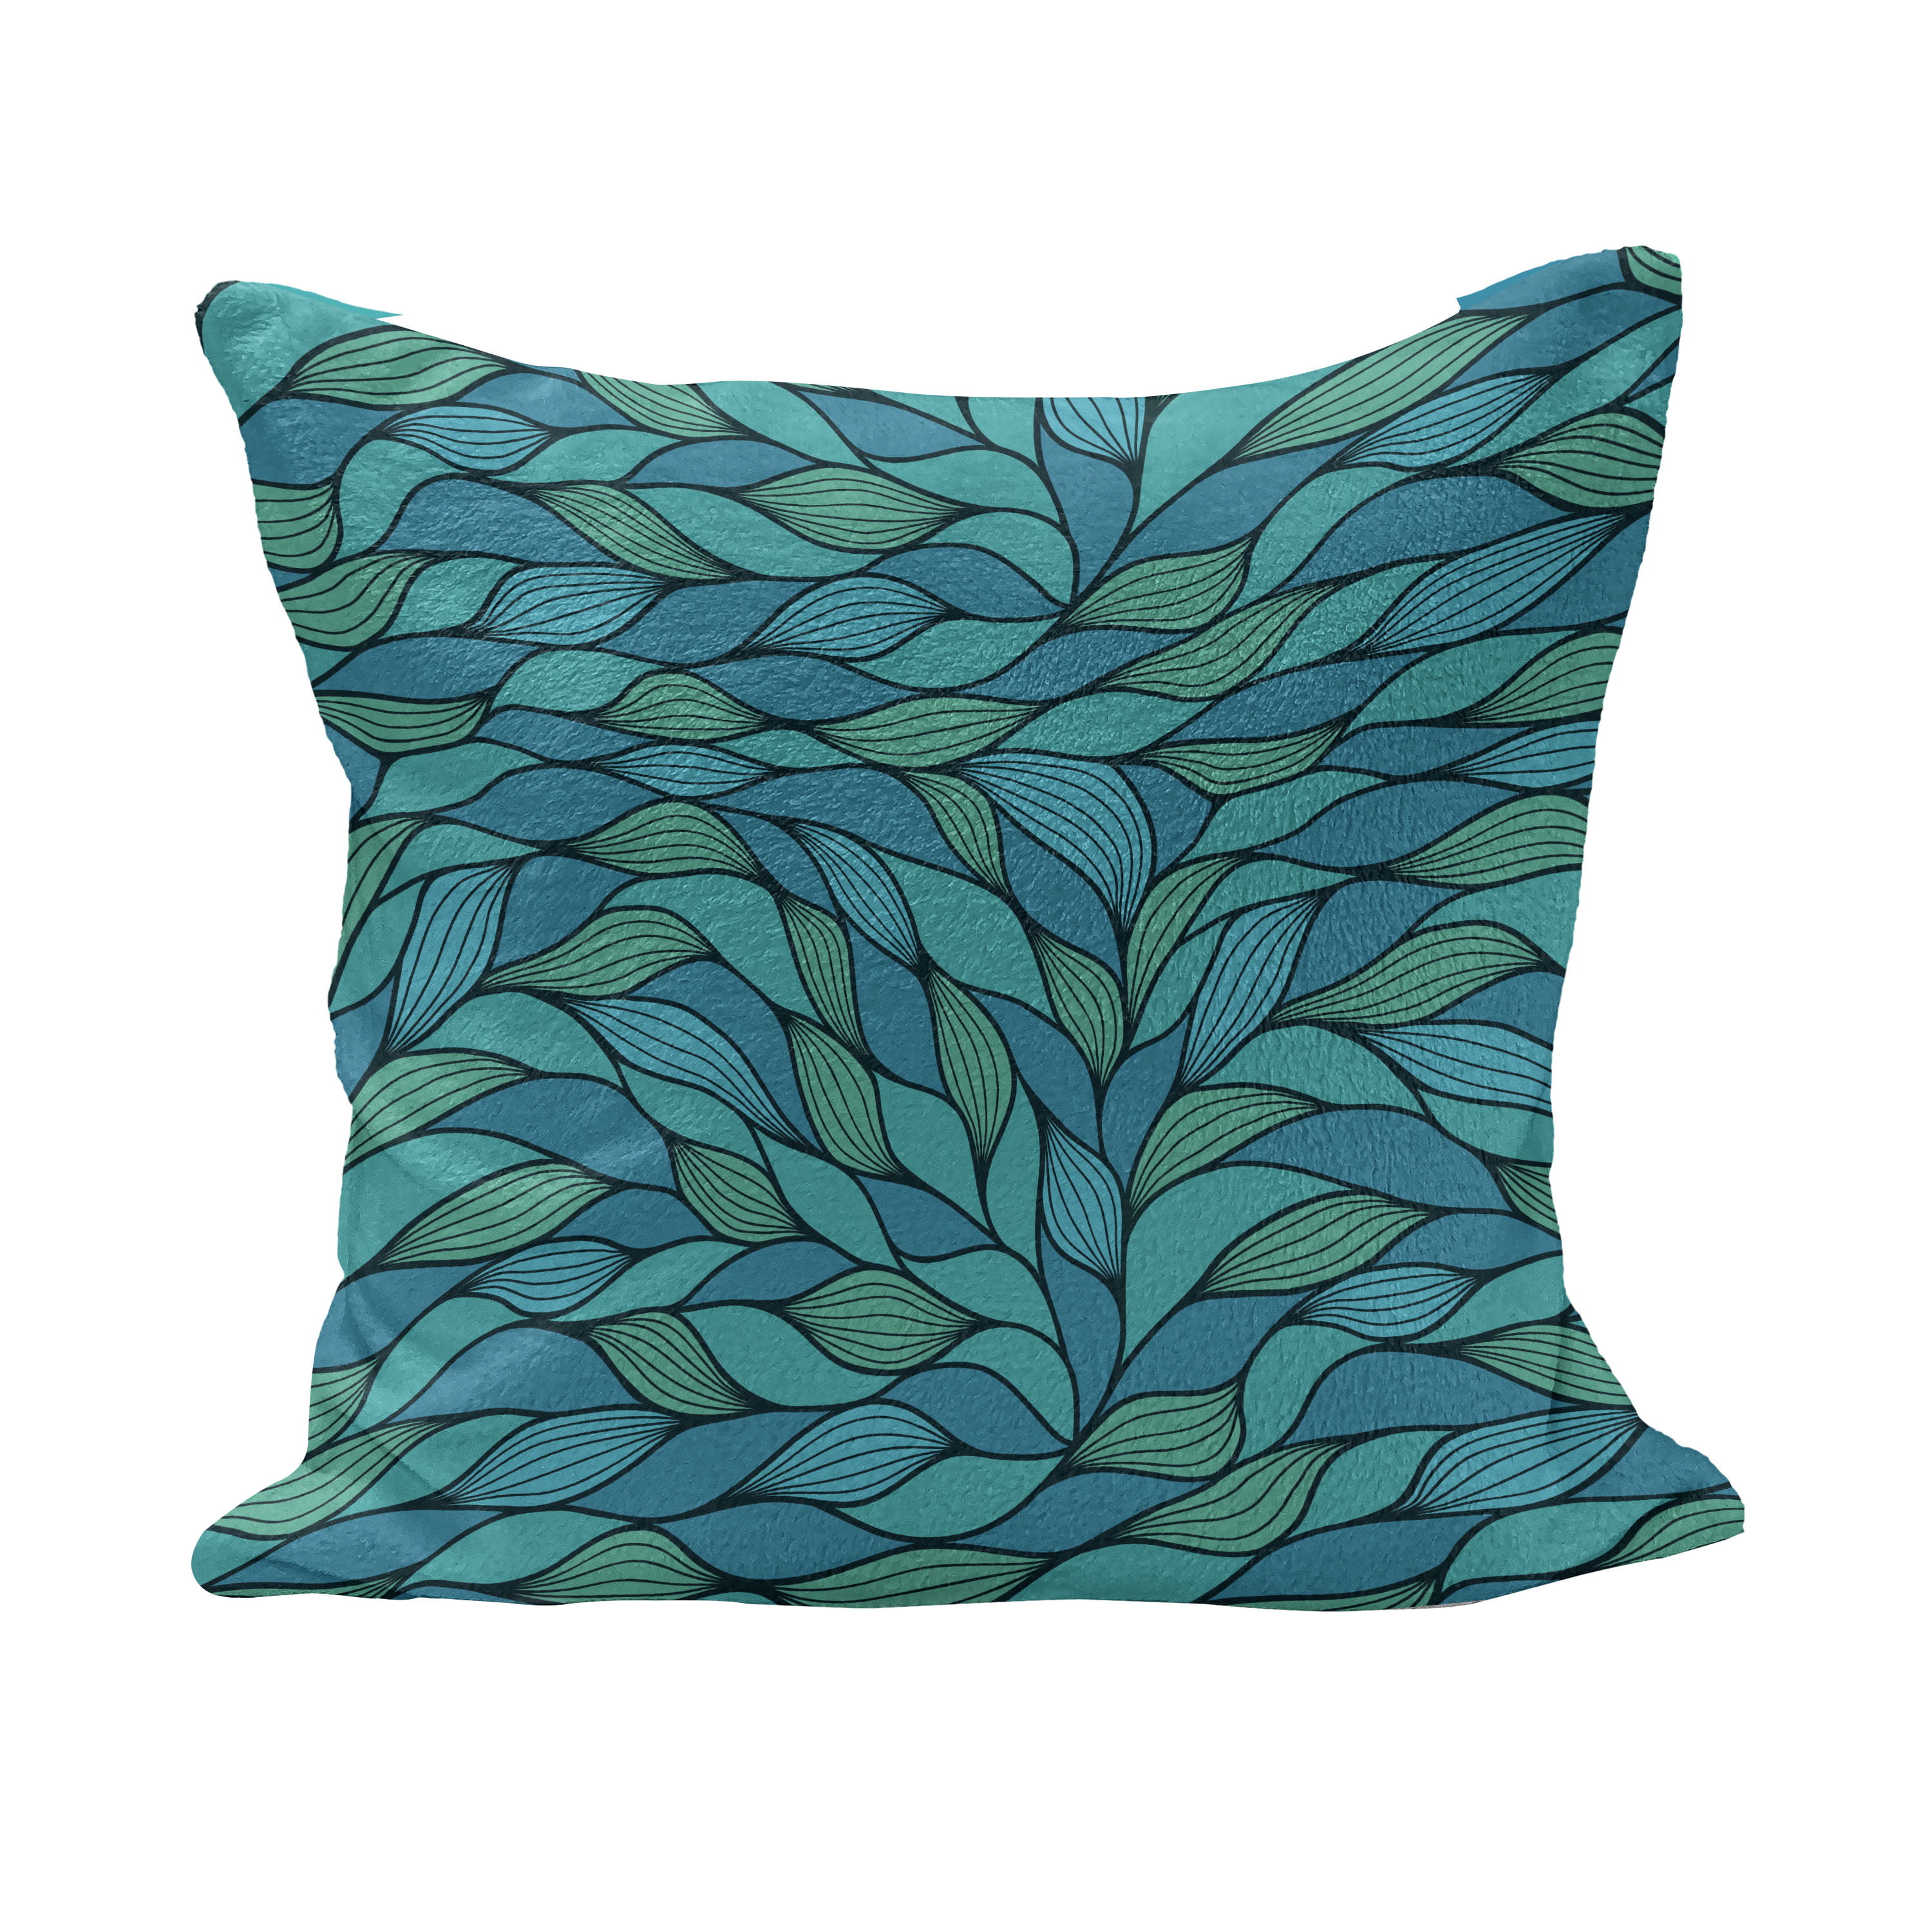 Abstract Retro Water Waves Throw Pillow Cover w Optional Insert by Roostery 